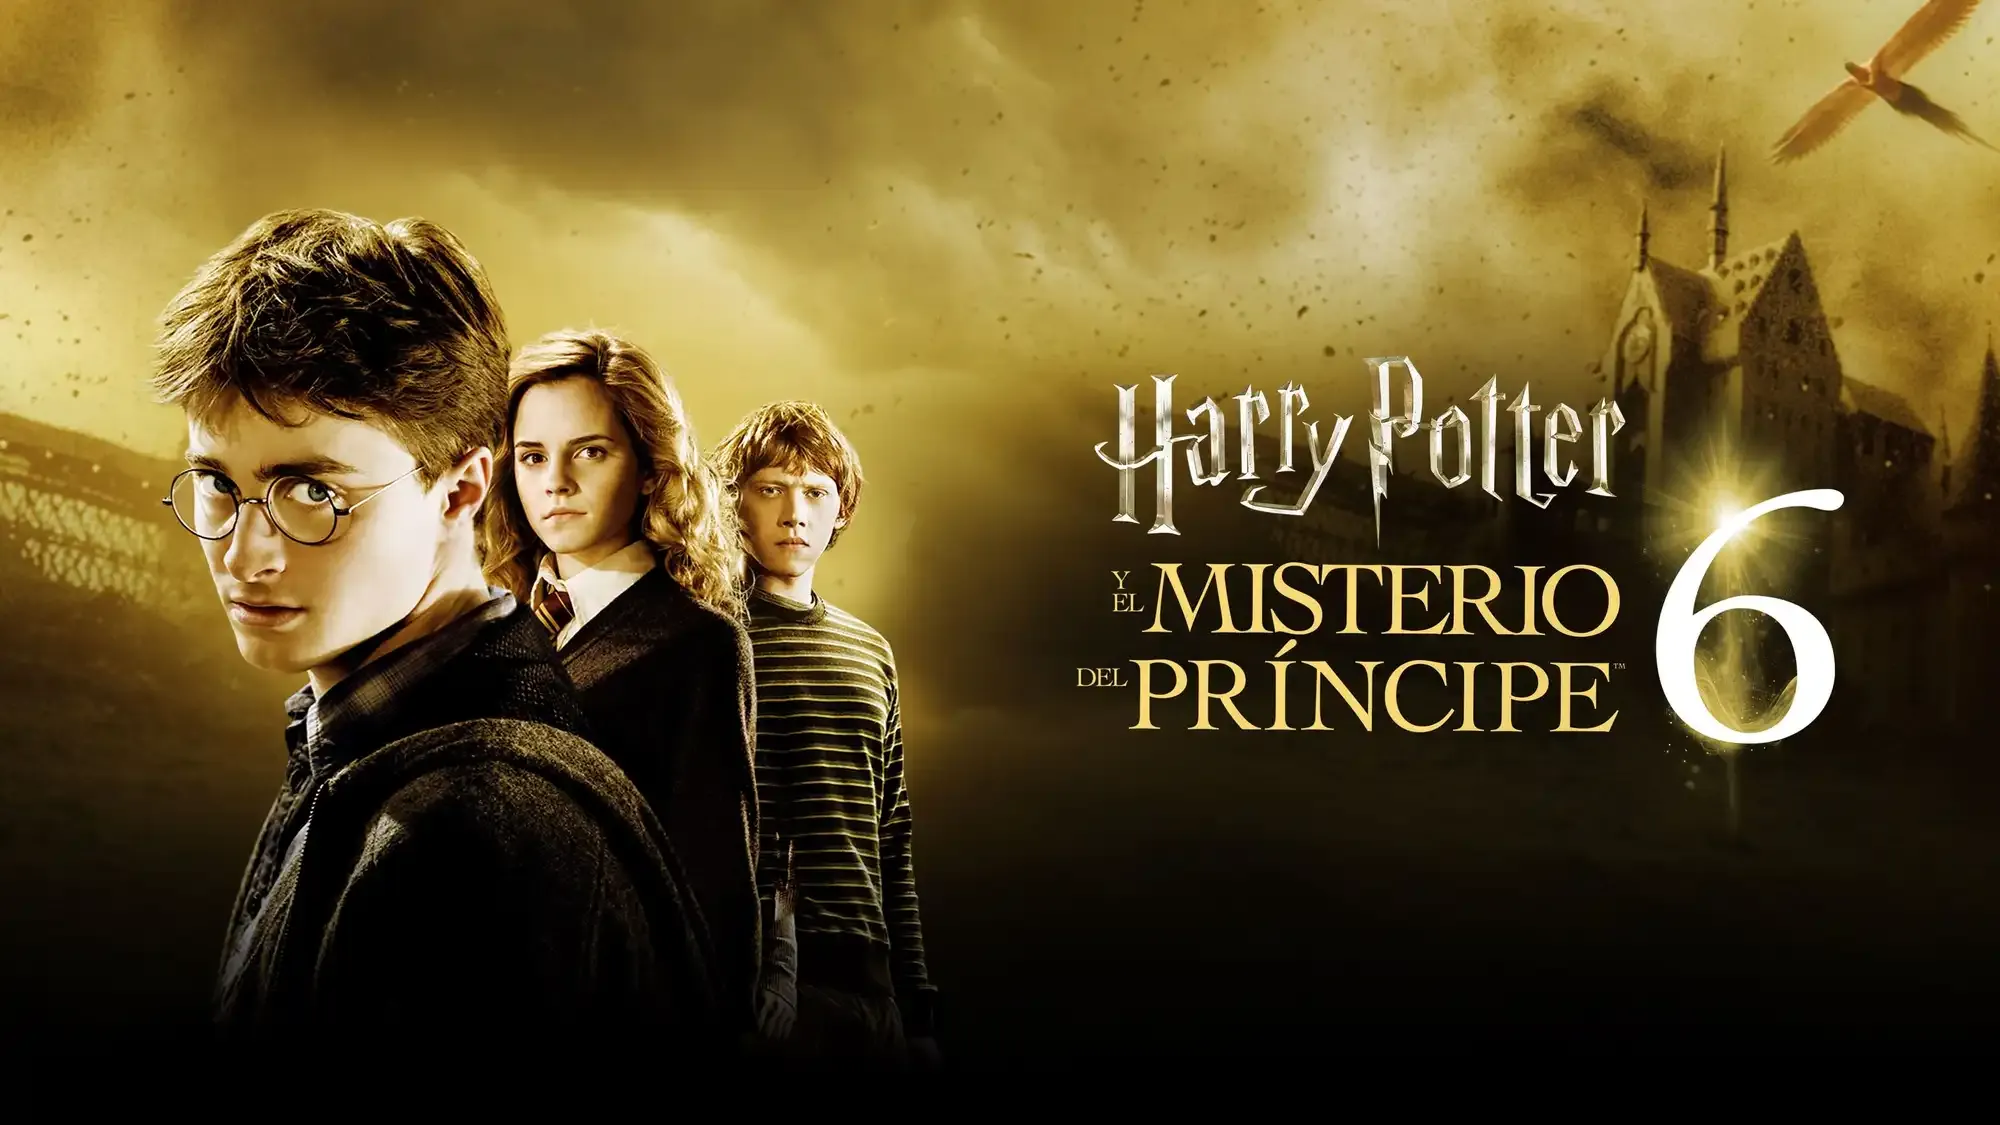 Harry Potter and the Half-Blood Prince movie review